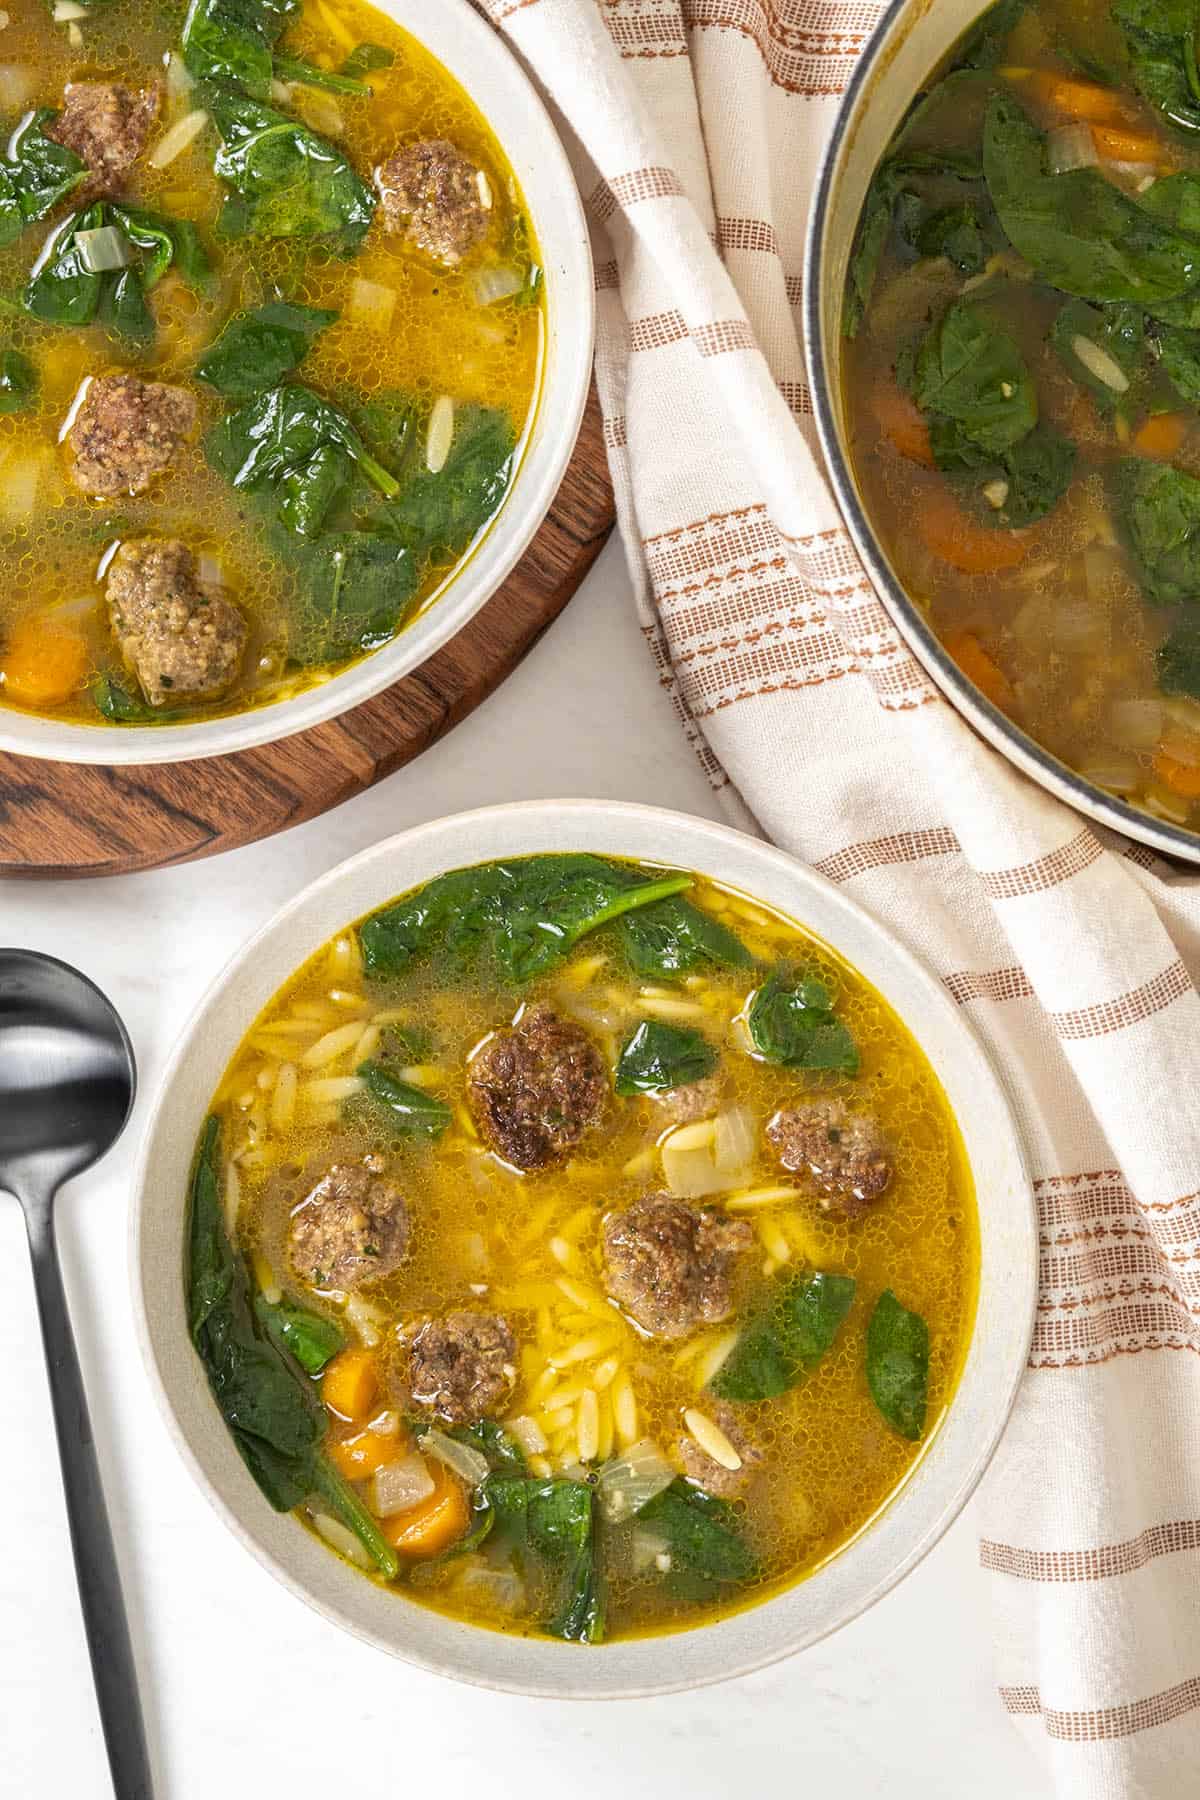 Italian wedding soup in a bowl with meatballs